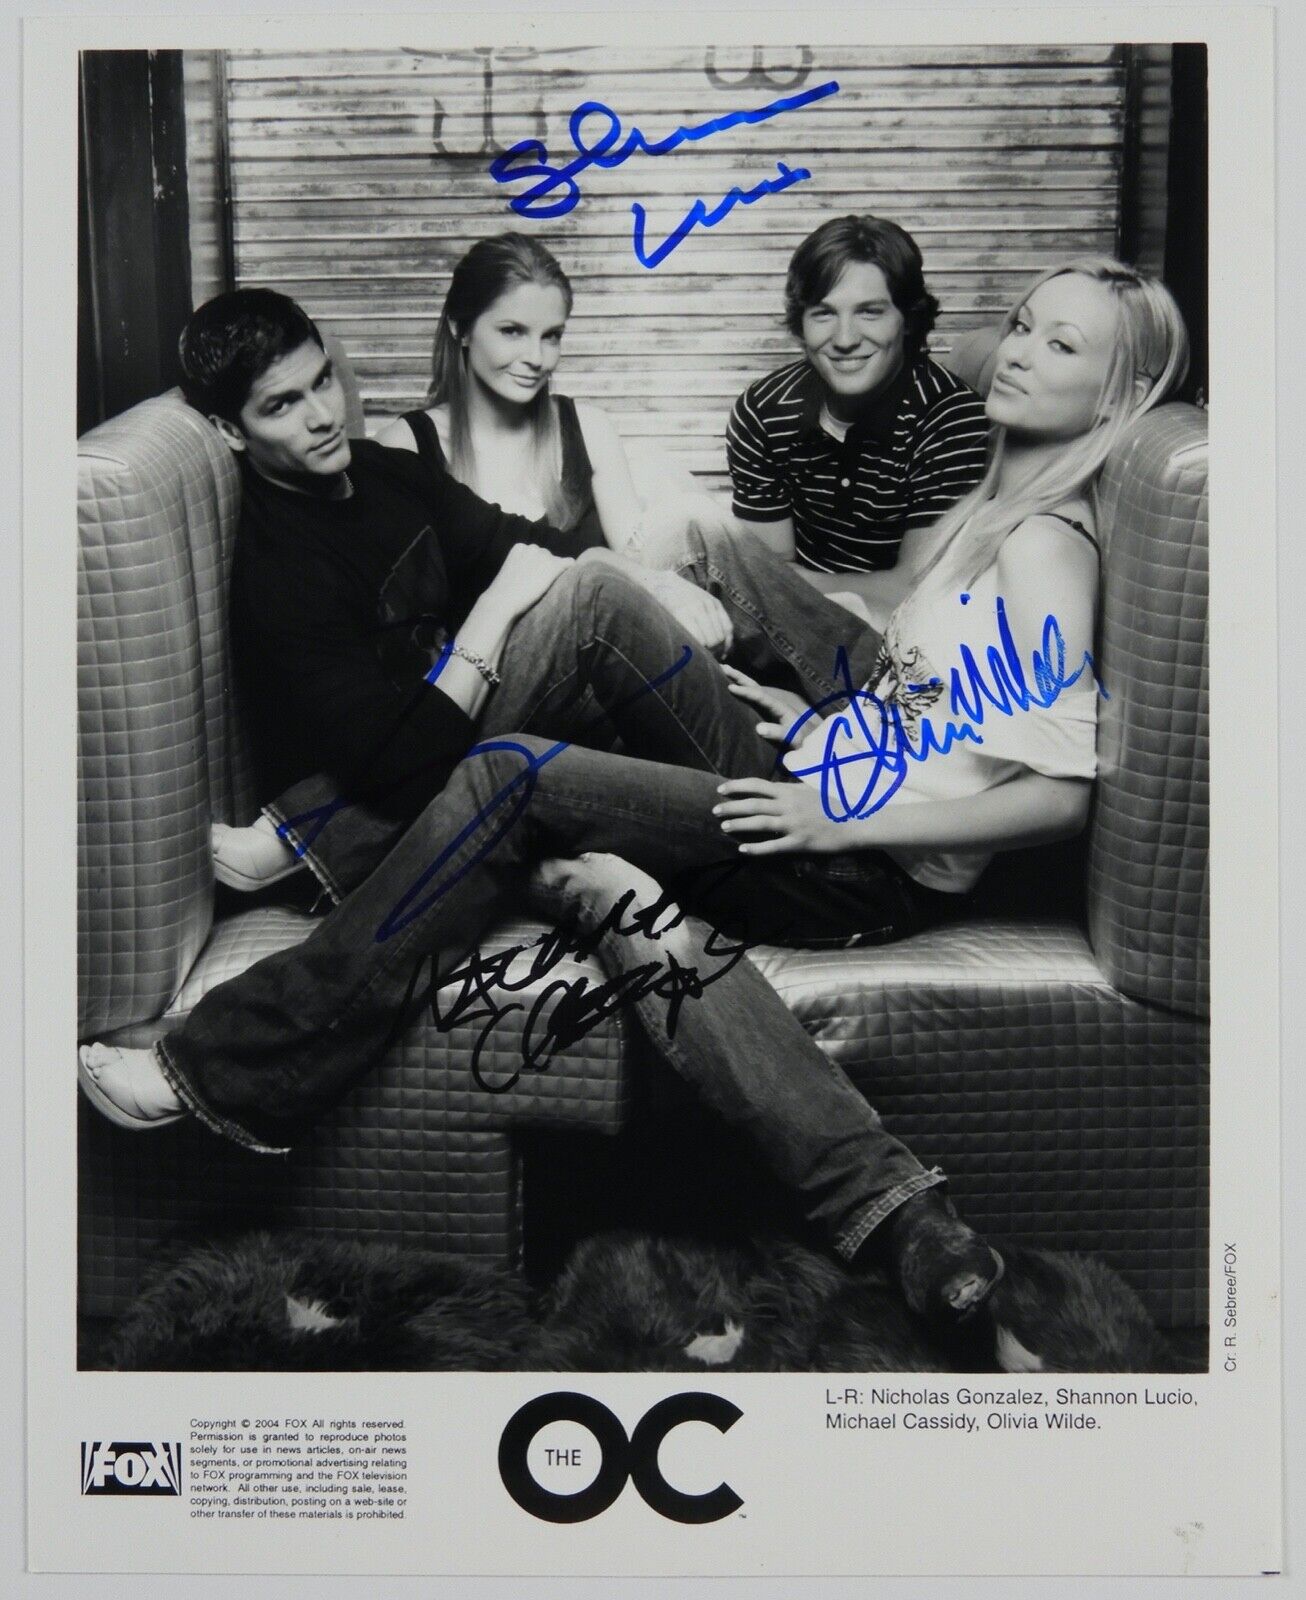 The OC Fully signed Autograph JSA 8 x 10 Signed Olivia Wilde Micheal Cassidy +